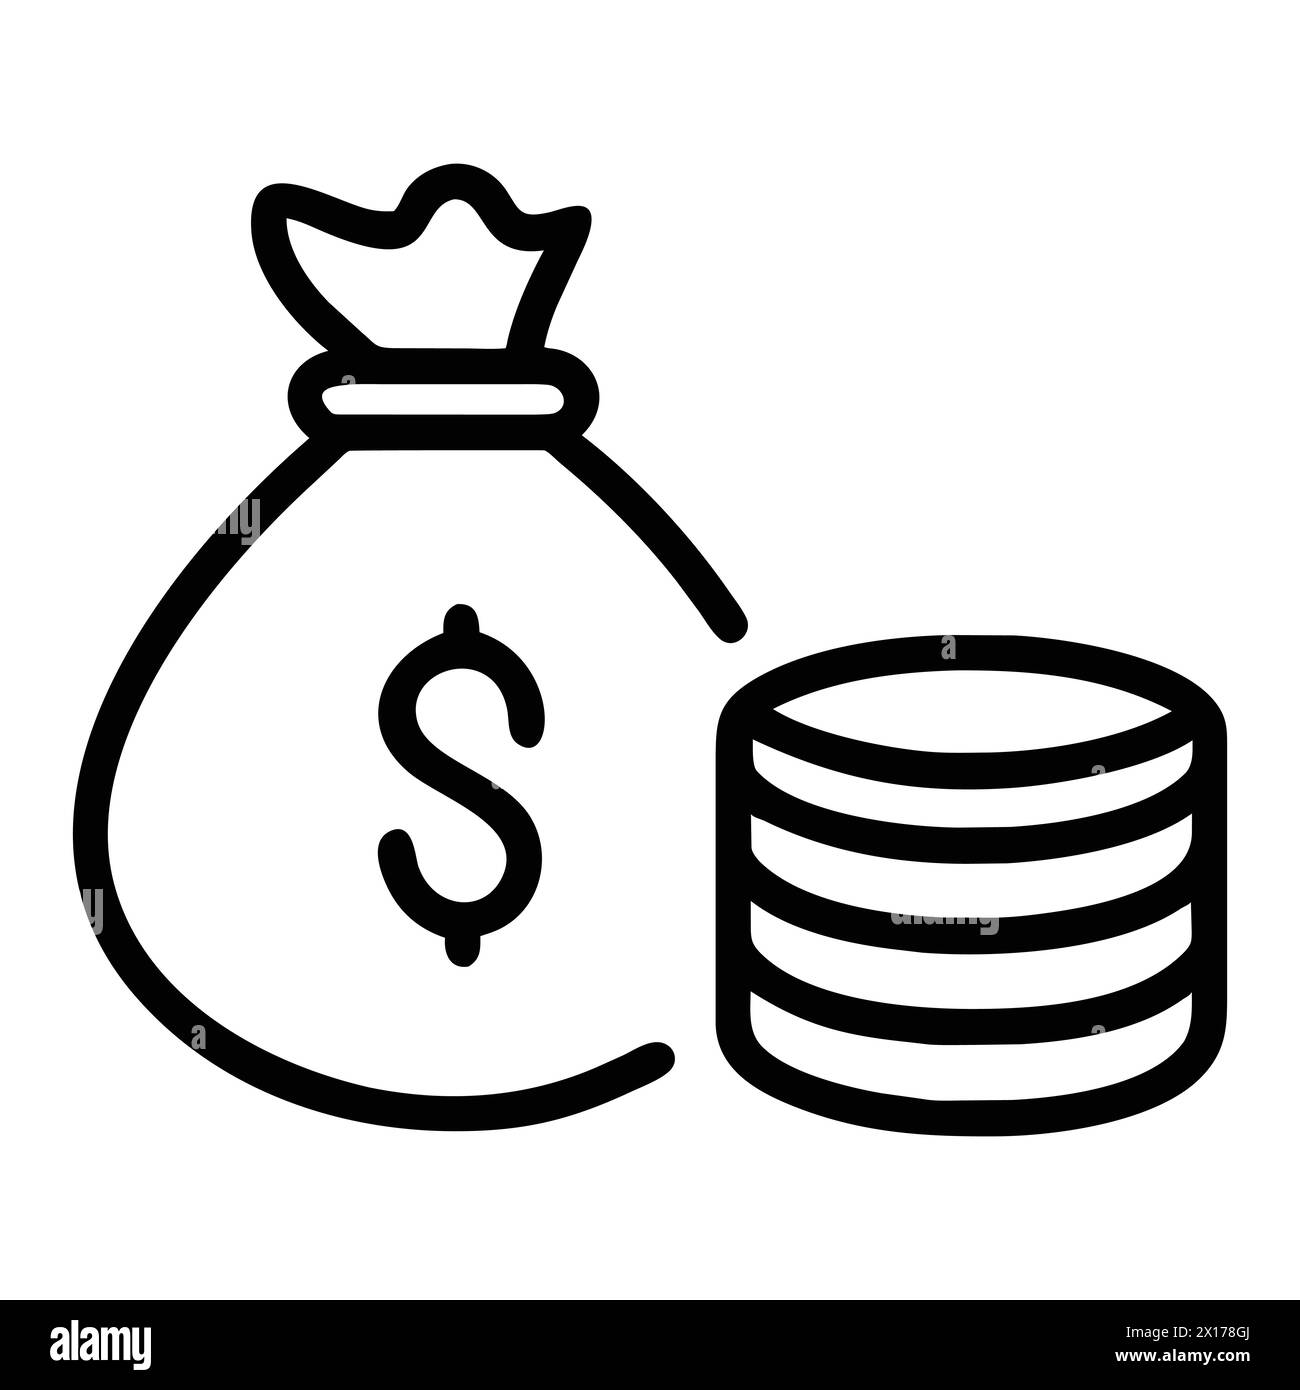 'Personal Finance Management: Stacked Coins in Savings' Stock Vector